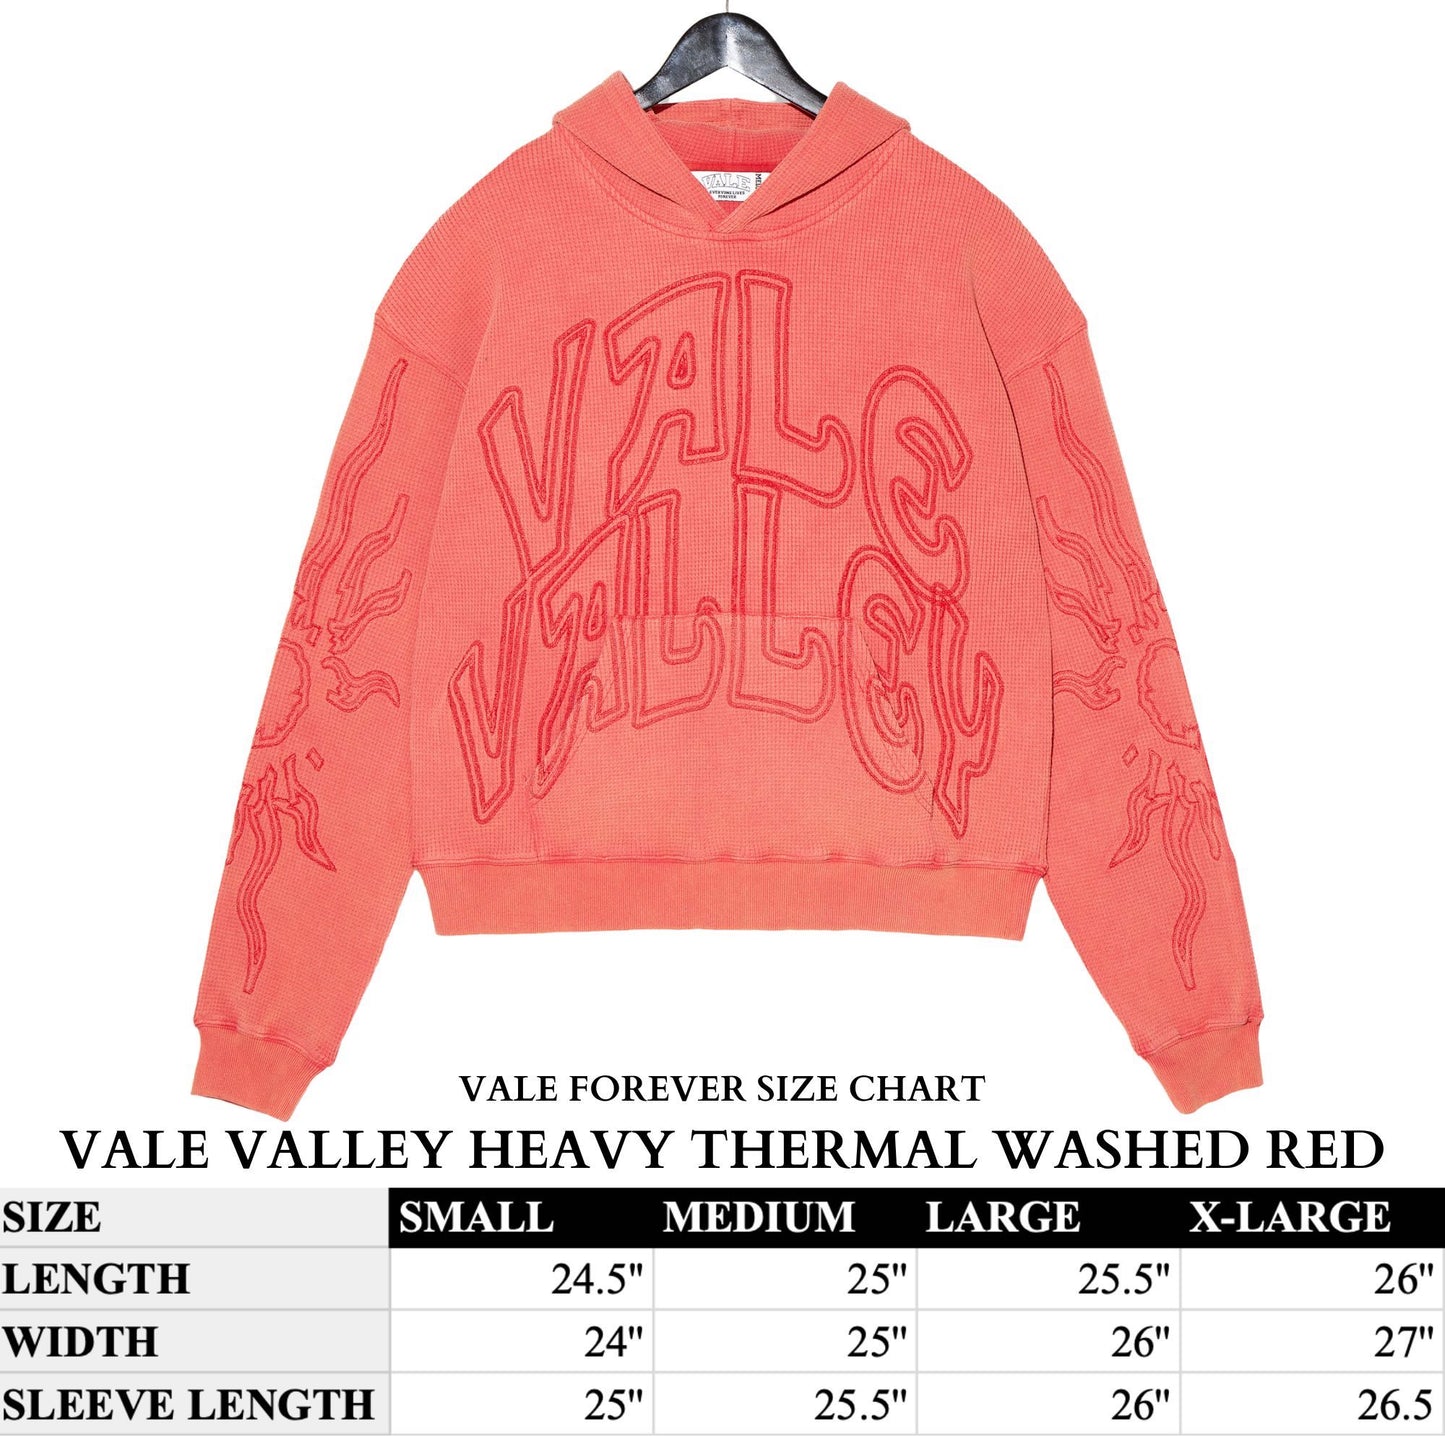 VALE VALLEY HEAVY THERMAL WASHED RED